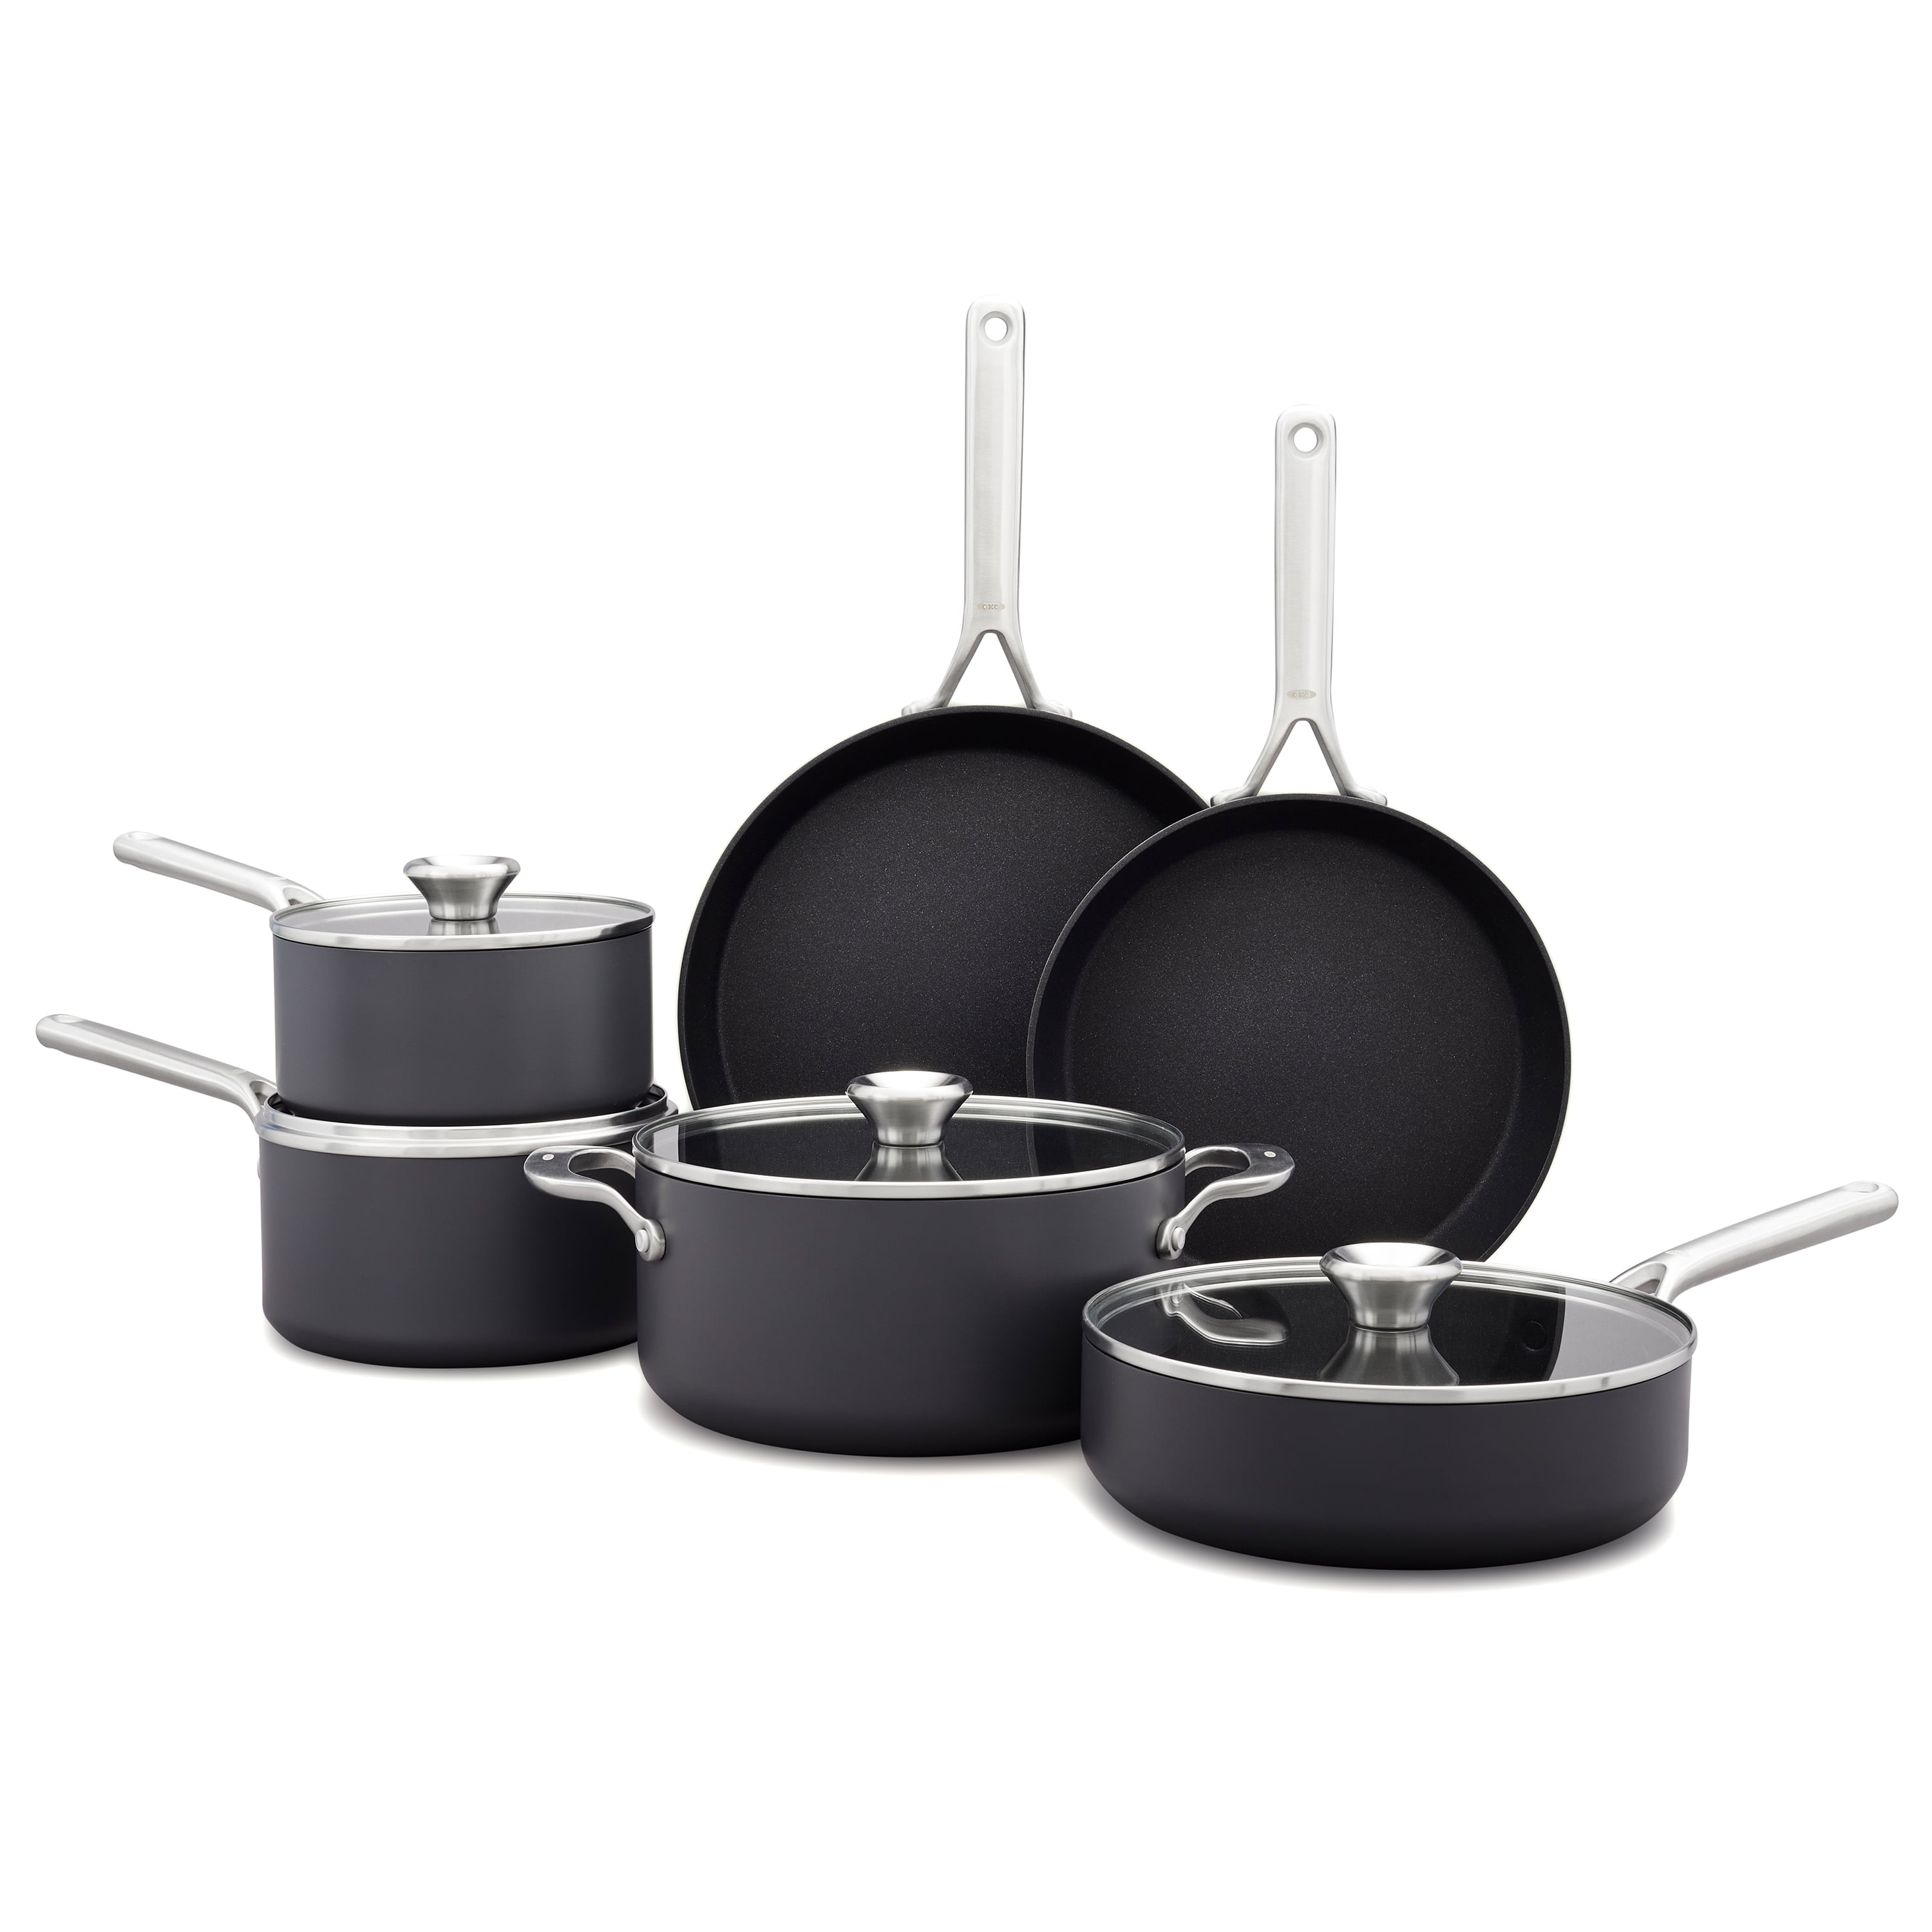  ExcelSteel Durable Kitchenware Perfect for Home Stovetop and  Delicious Outdoor Cooking Skillet Set, 3 Pc, Black Cast Iron: Home & Kitchen